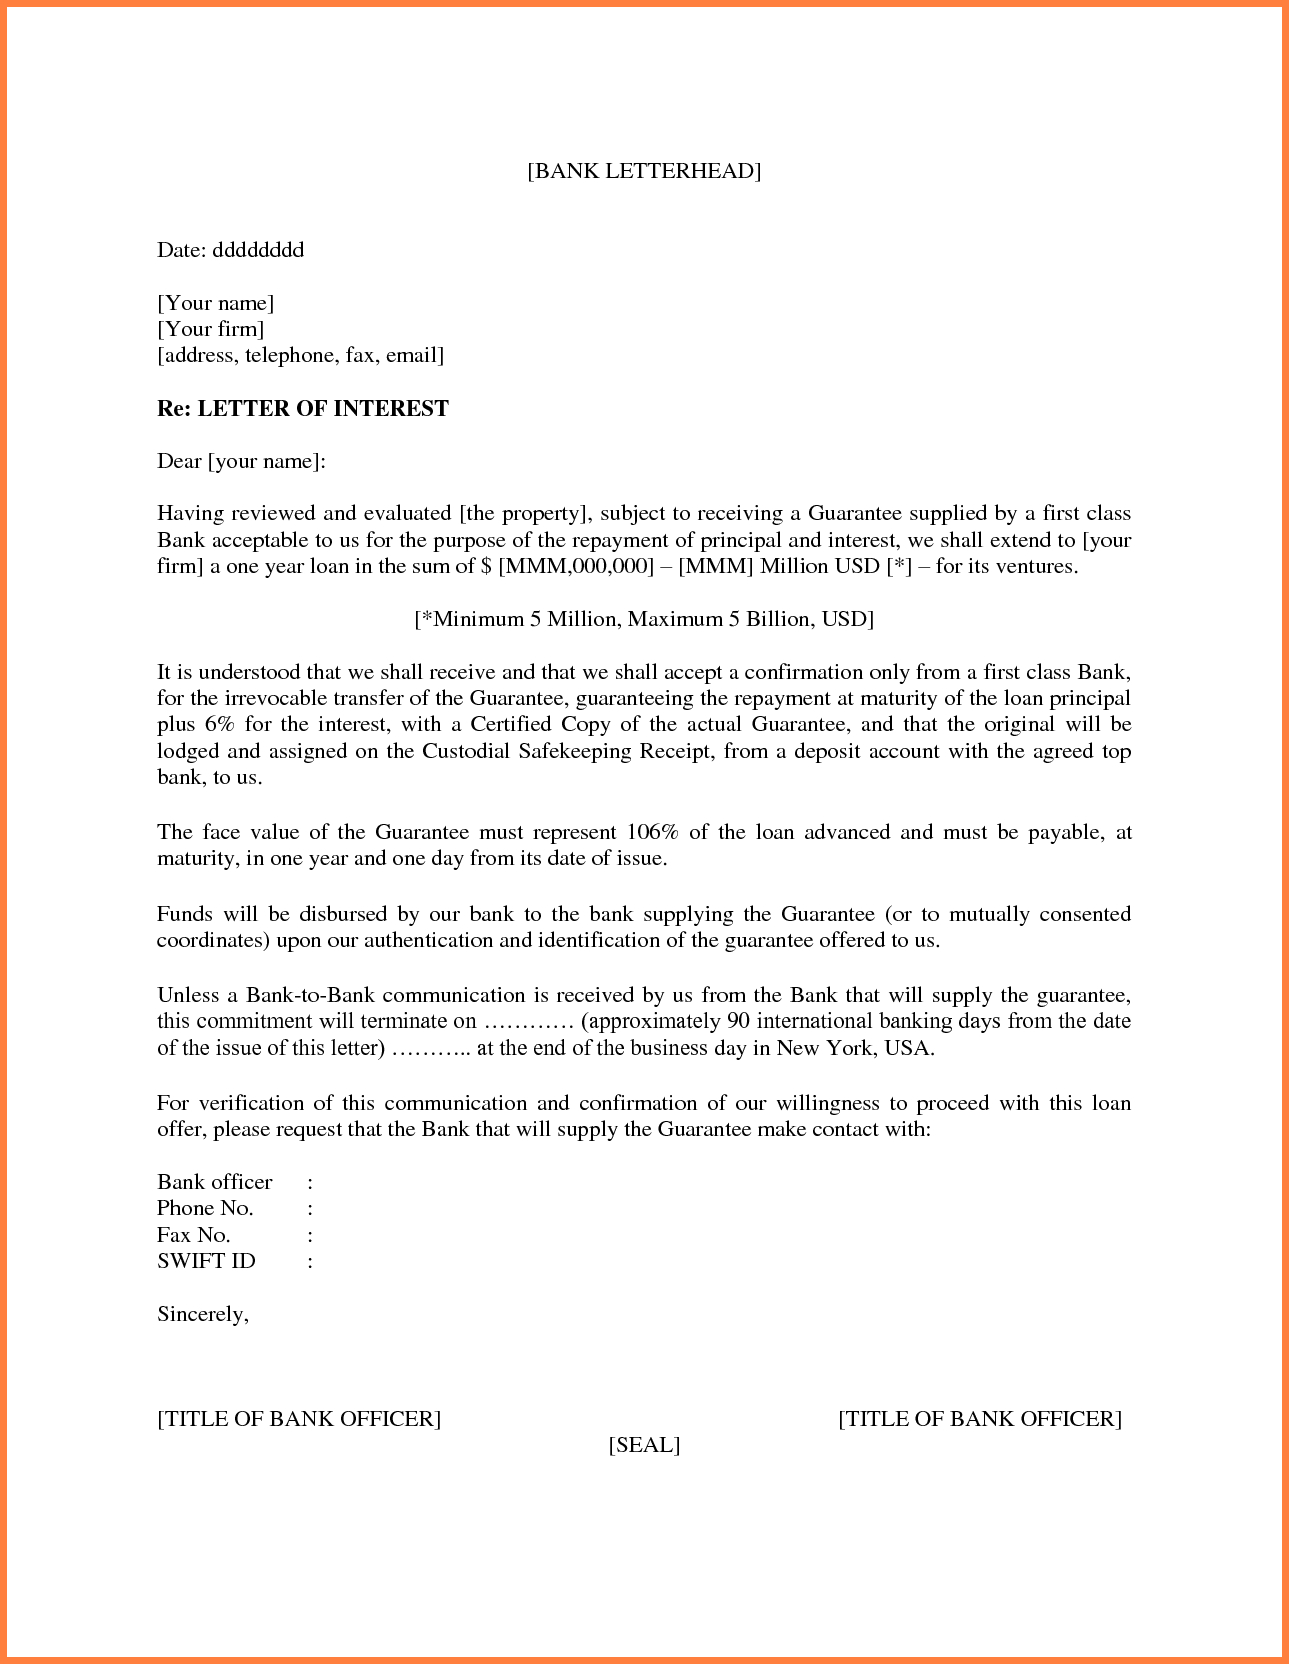 011 Letter Of Interest Template Microsoft Word Sweep11 Ideas Within Letter Of Interest Template Microsoft Word